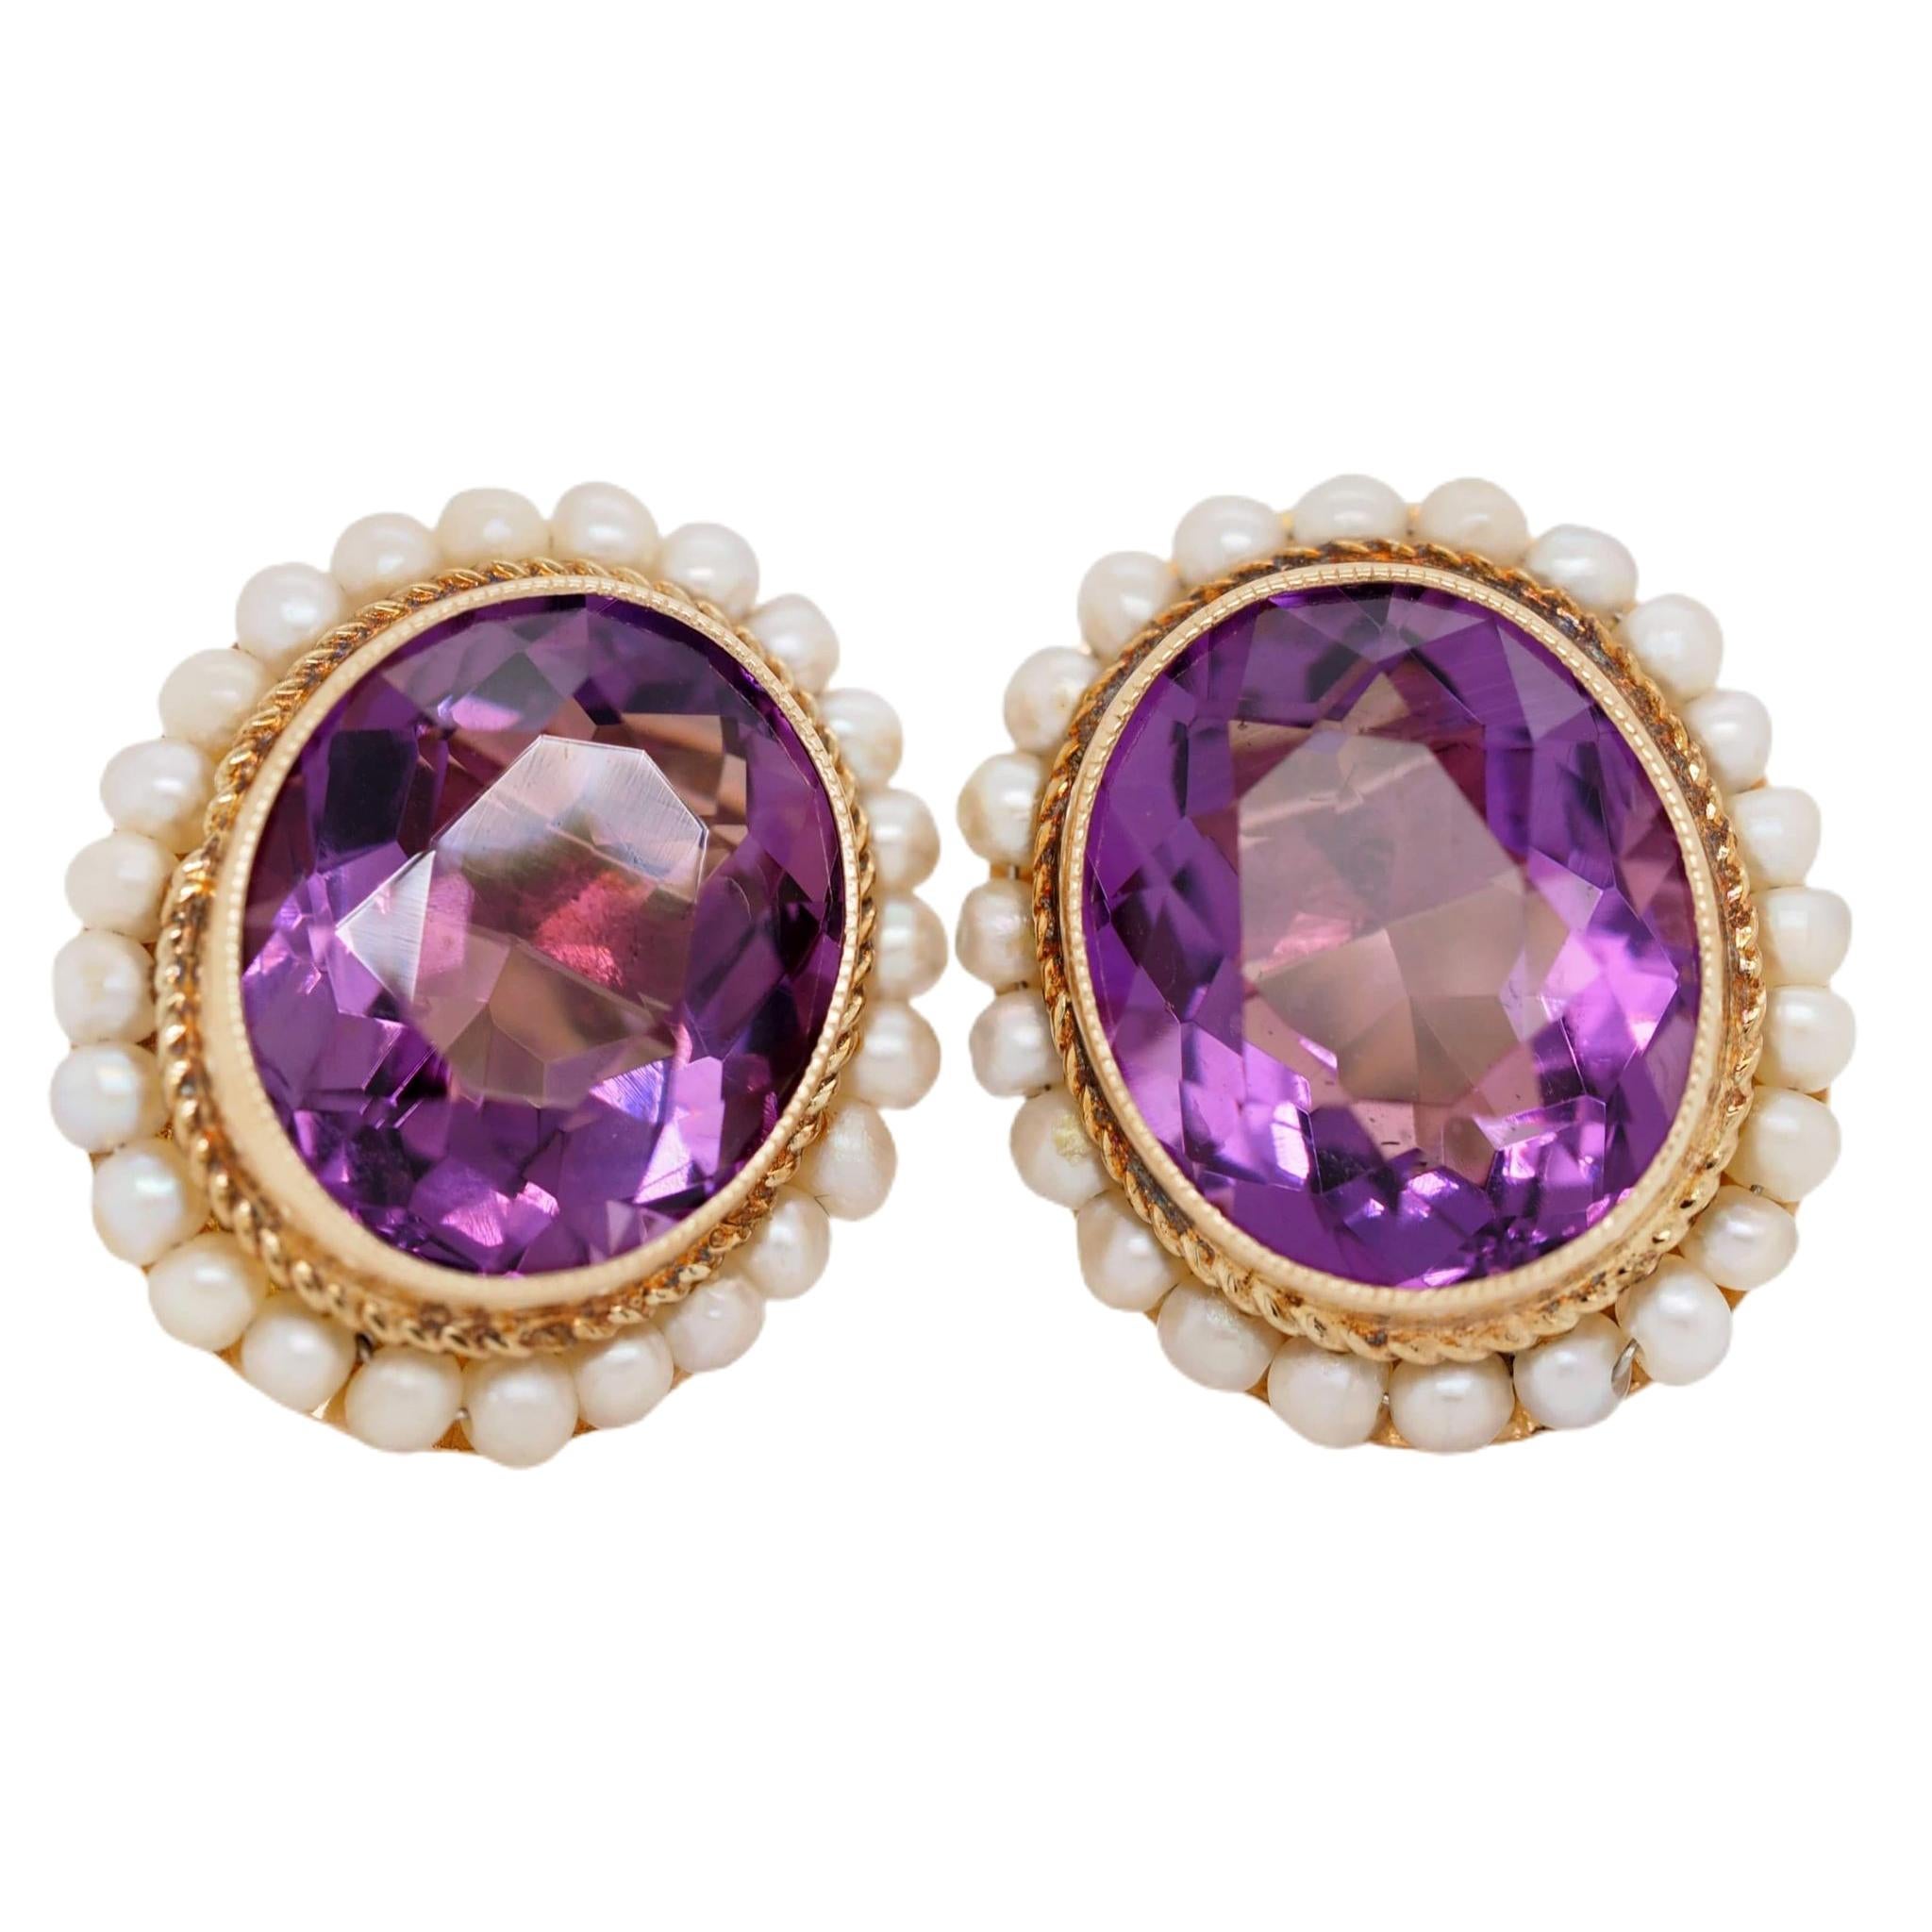 14k Yellow Gold Oval Amethyst Earrings Bezel Set and Framed by Pearls